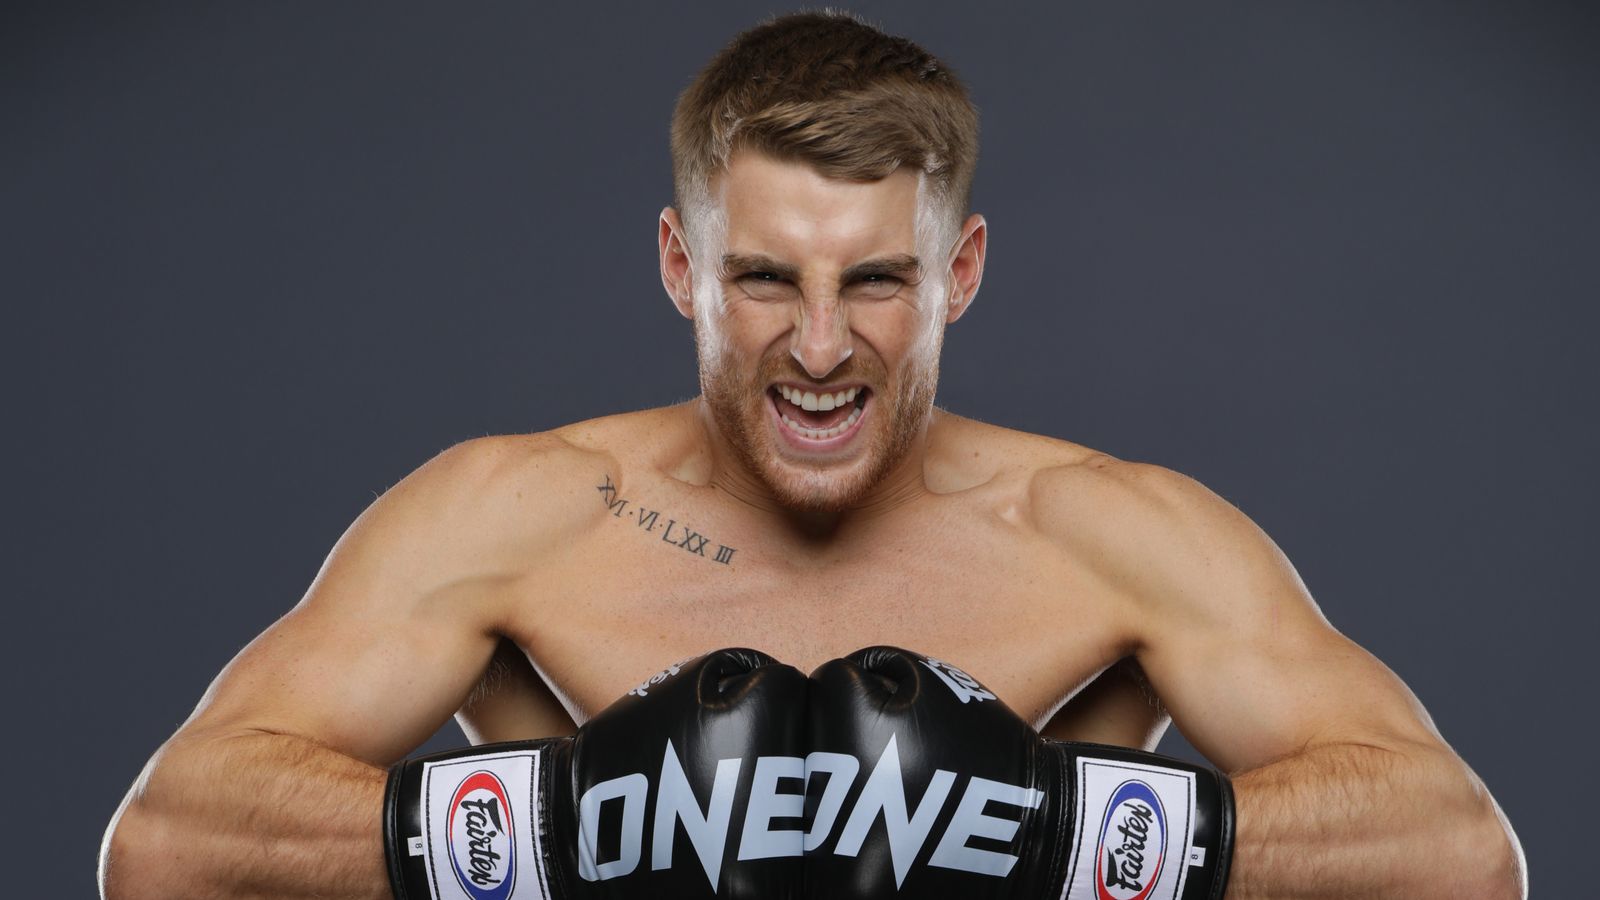 ONE dual-sport champion Jonathan Haggerty to defend Muay Thai world title on February 17 live on Sky Sports |  WWE news